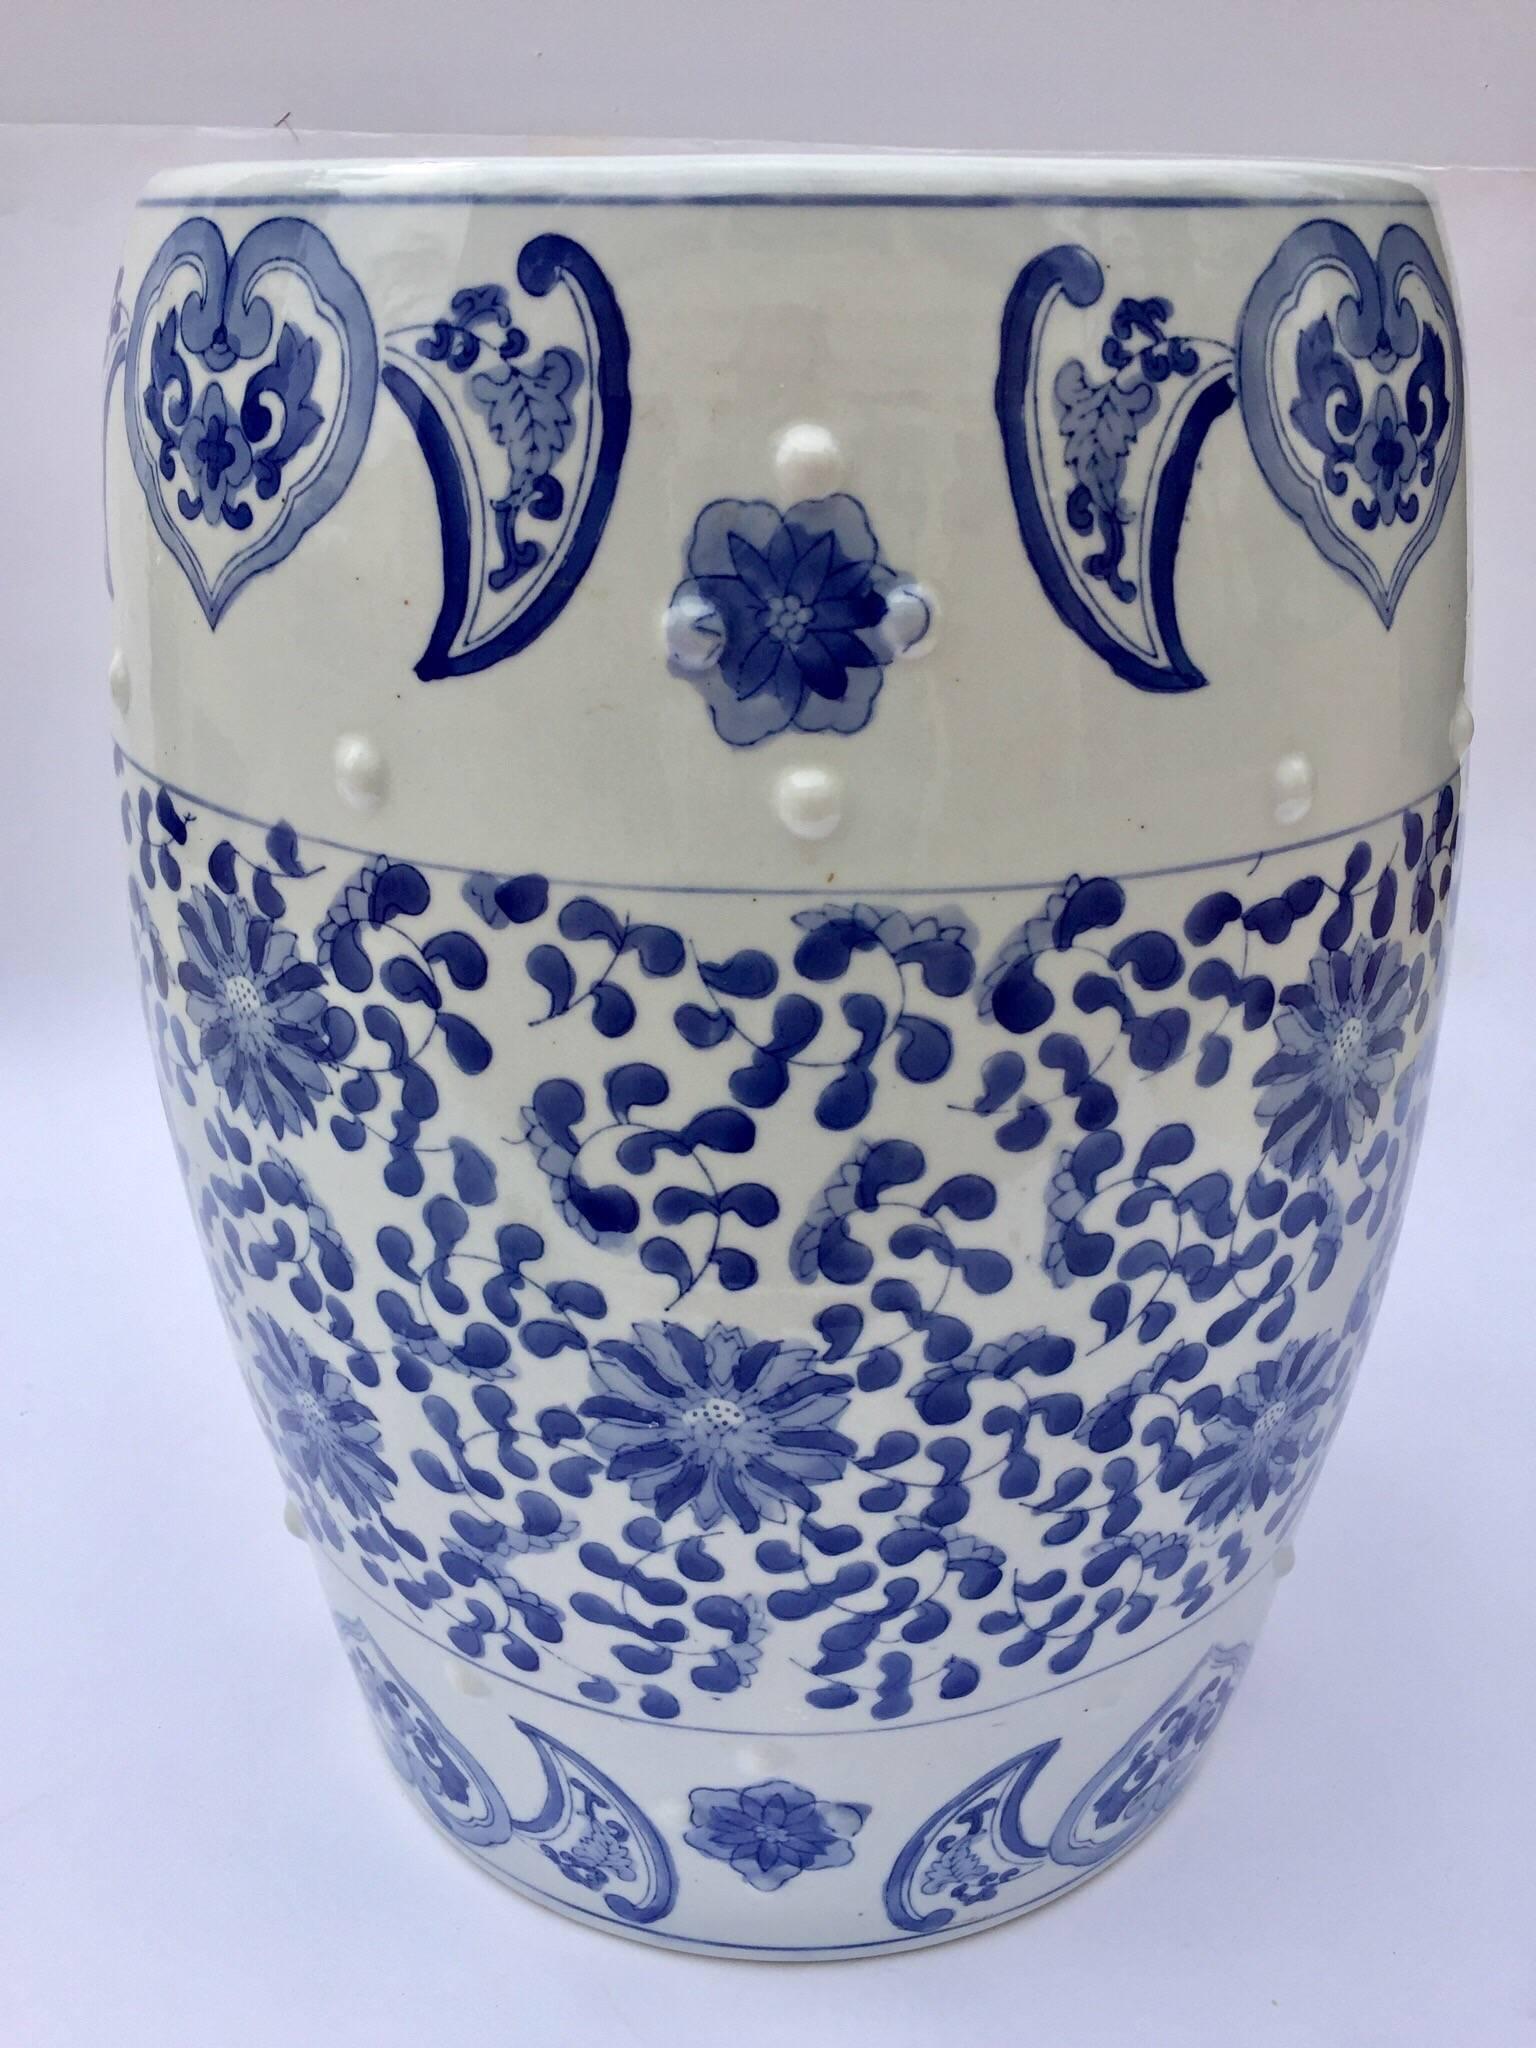 Asian ceramic garden seat or end table in blue and white floral motif.
Blue and white Chinese style ceramic garden stool with hand-painted striking floral chinoiserie floral art work.
Great to use indoor or outdoor as a stool or stand for